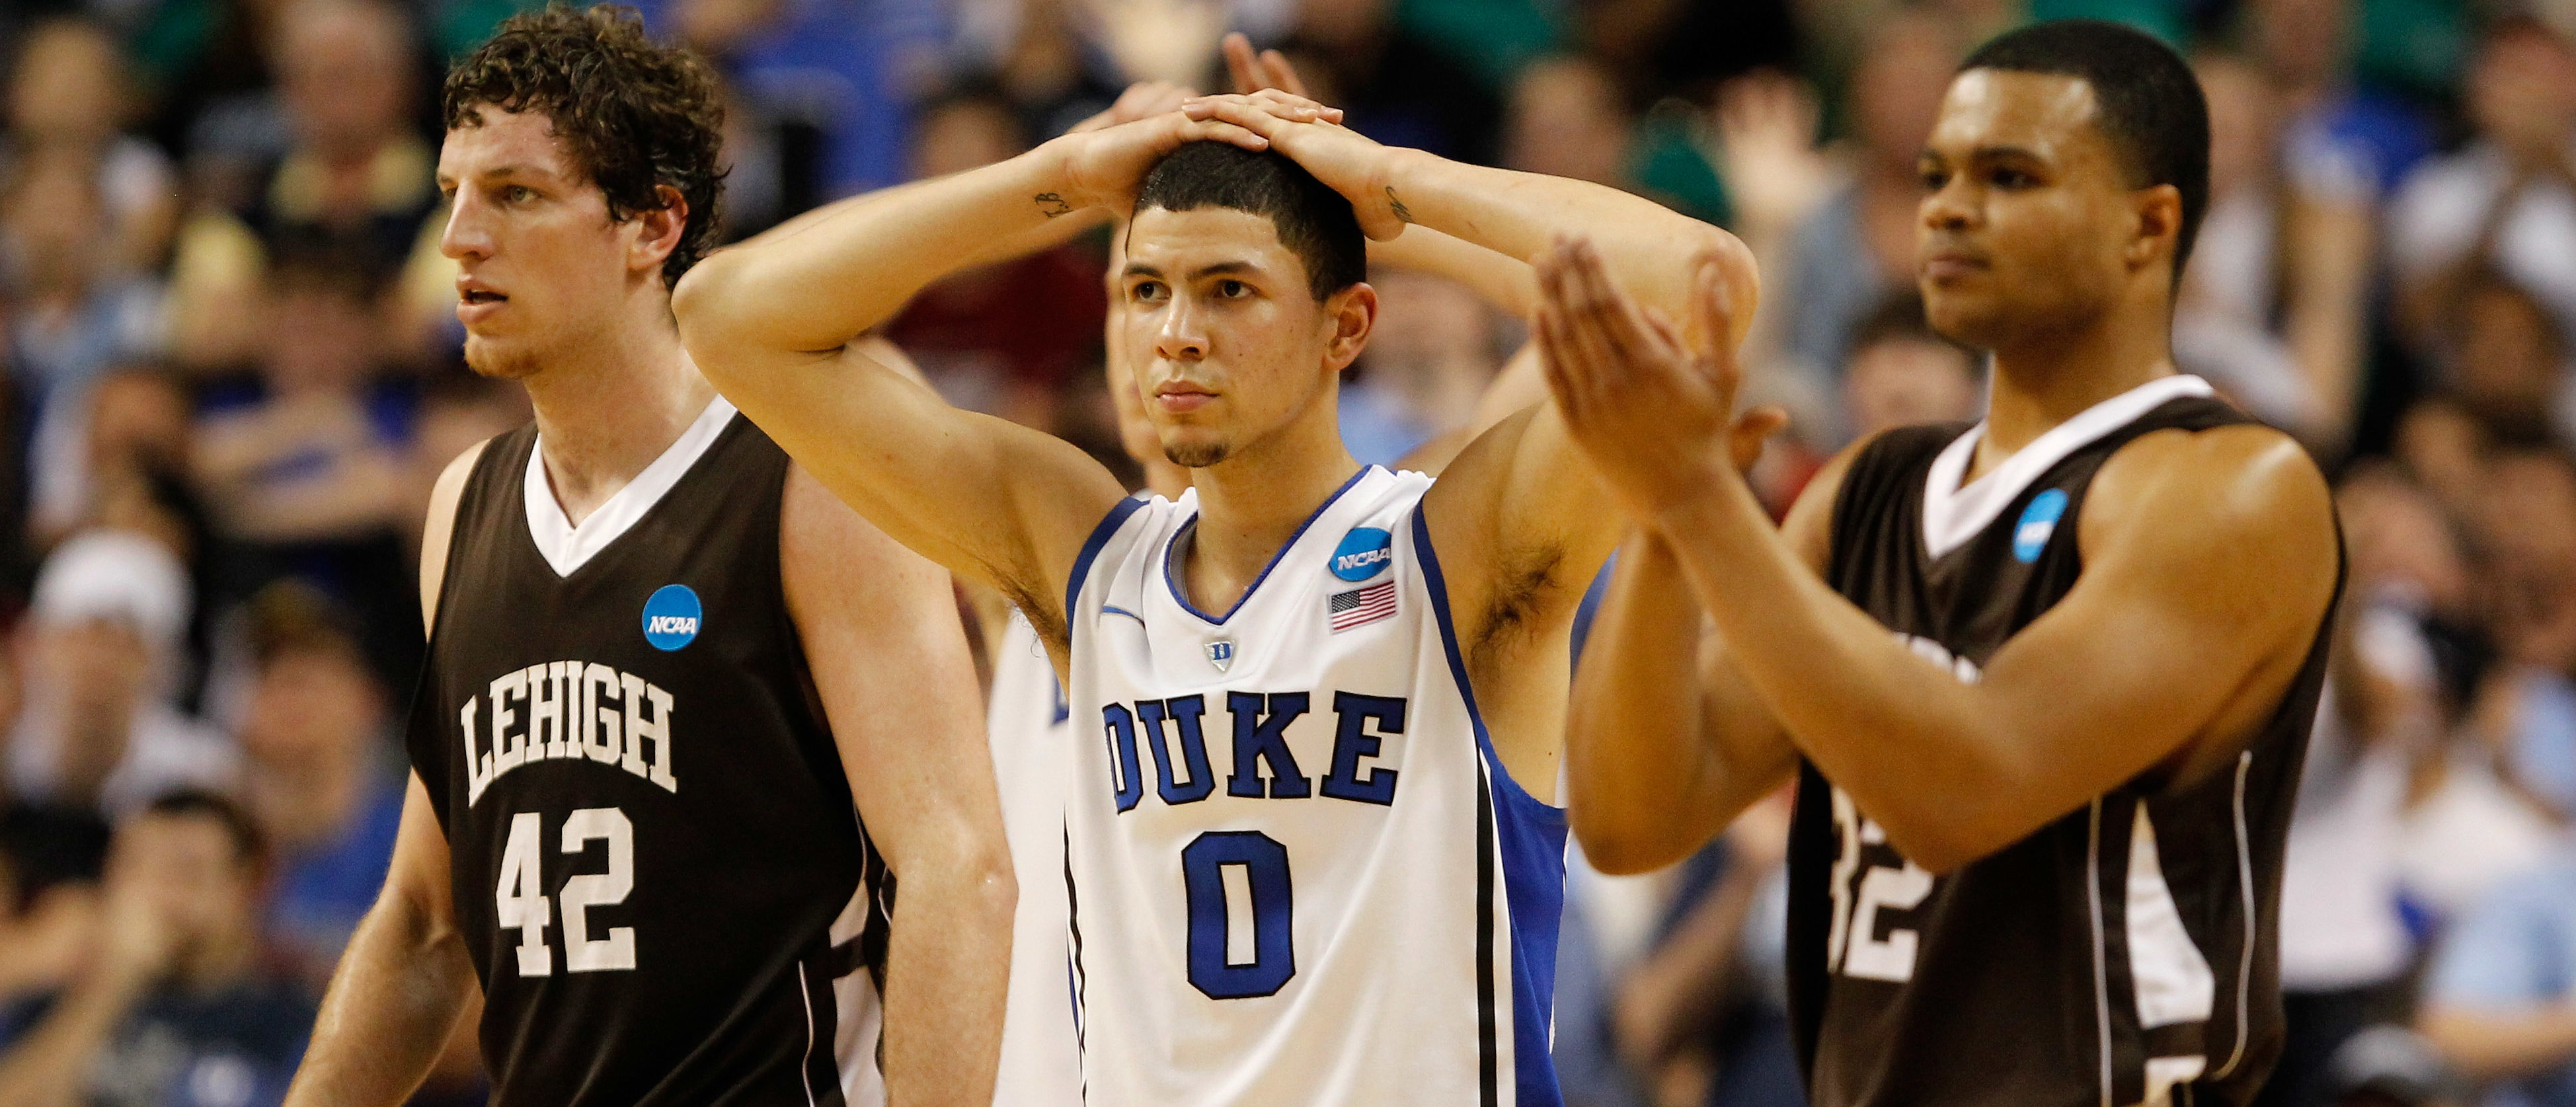 The Biggest Upsets In March Madness History [SLIDESHOW] The Daily Caller